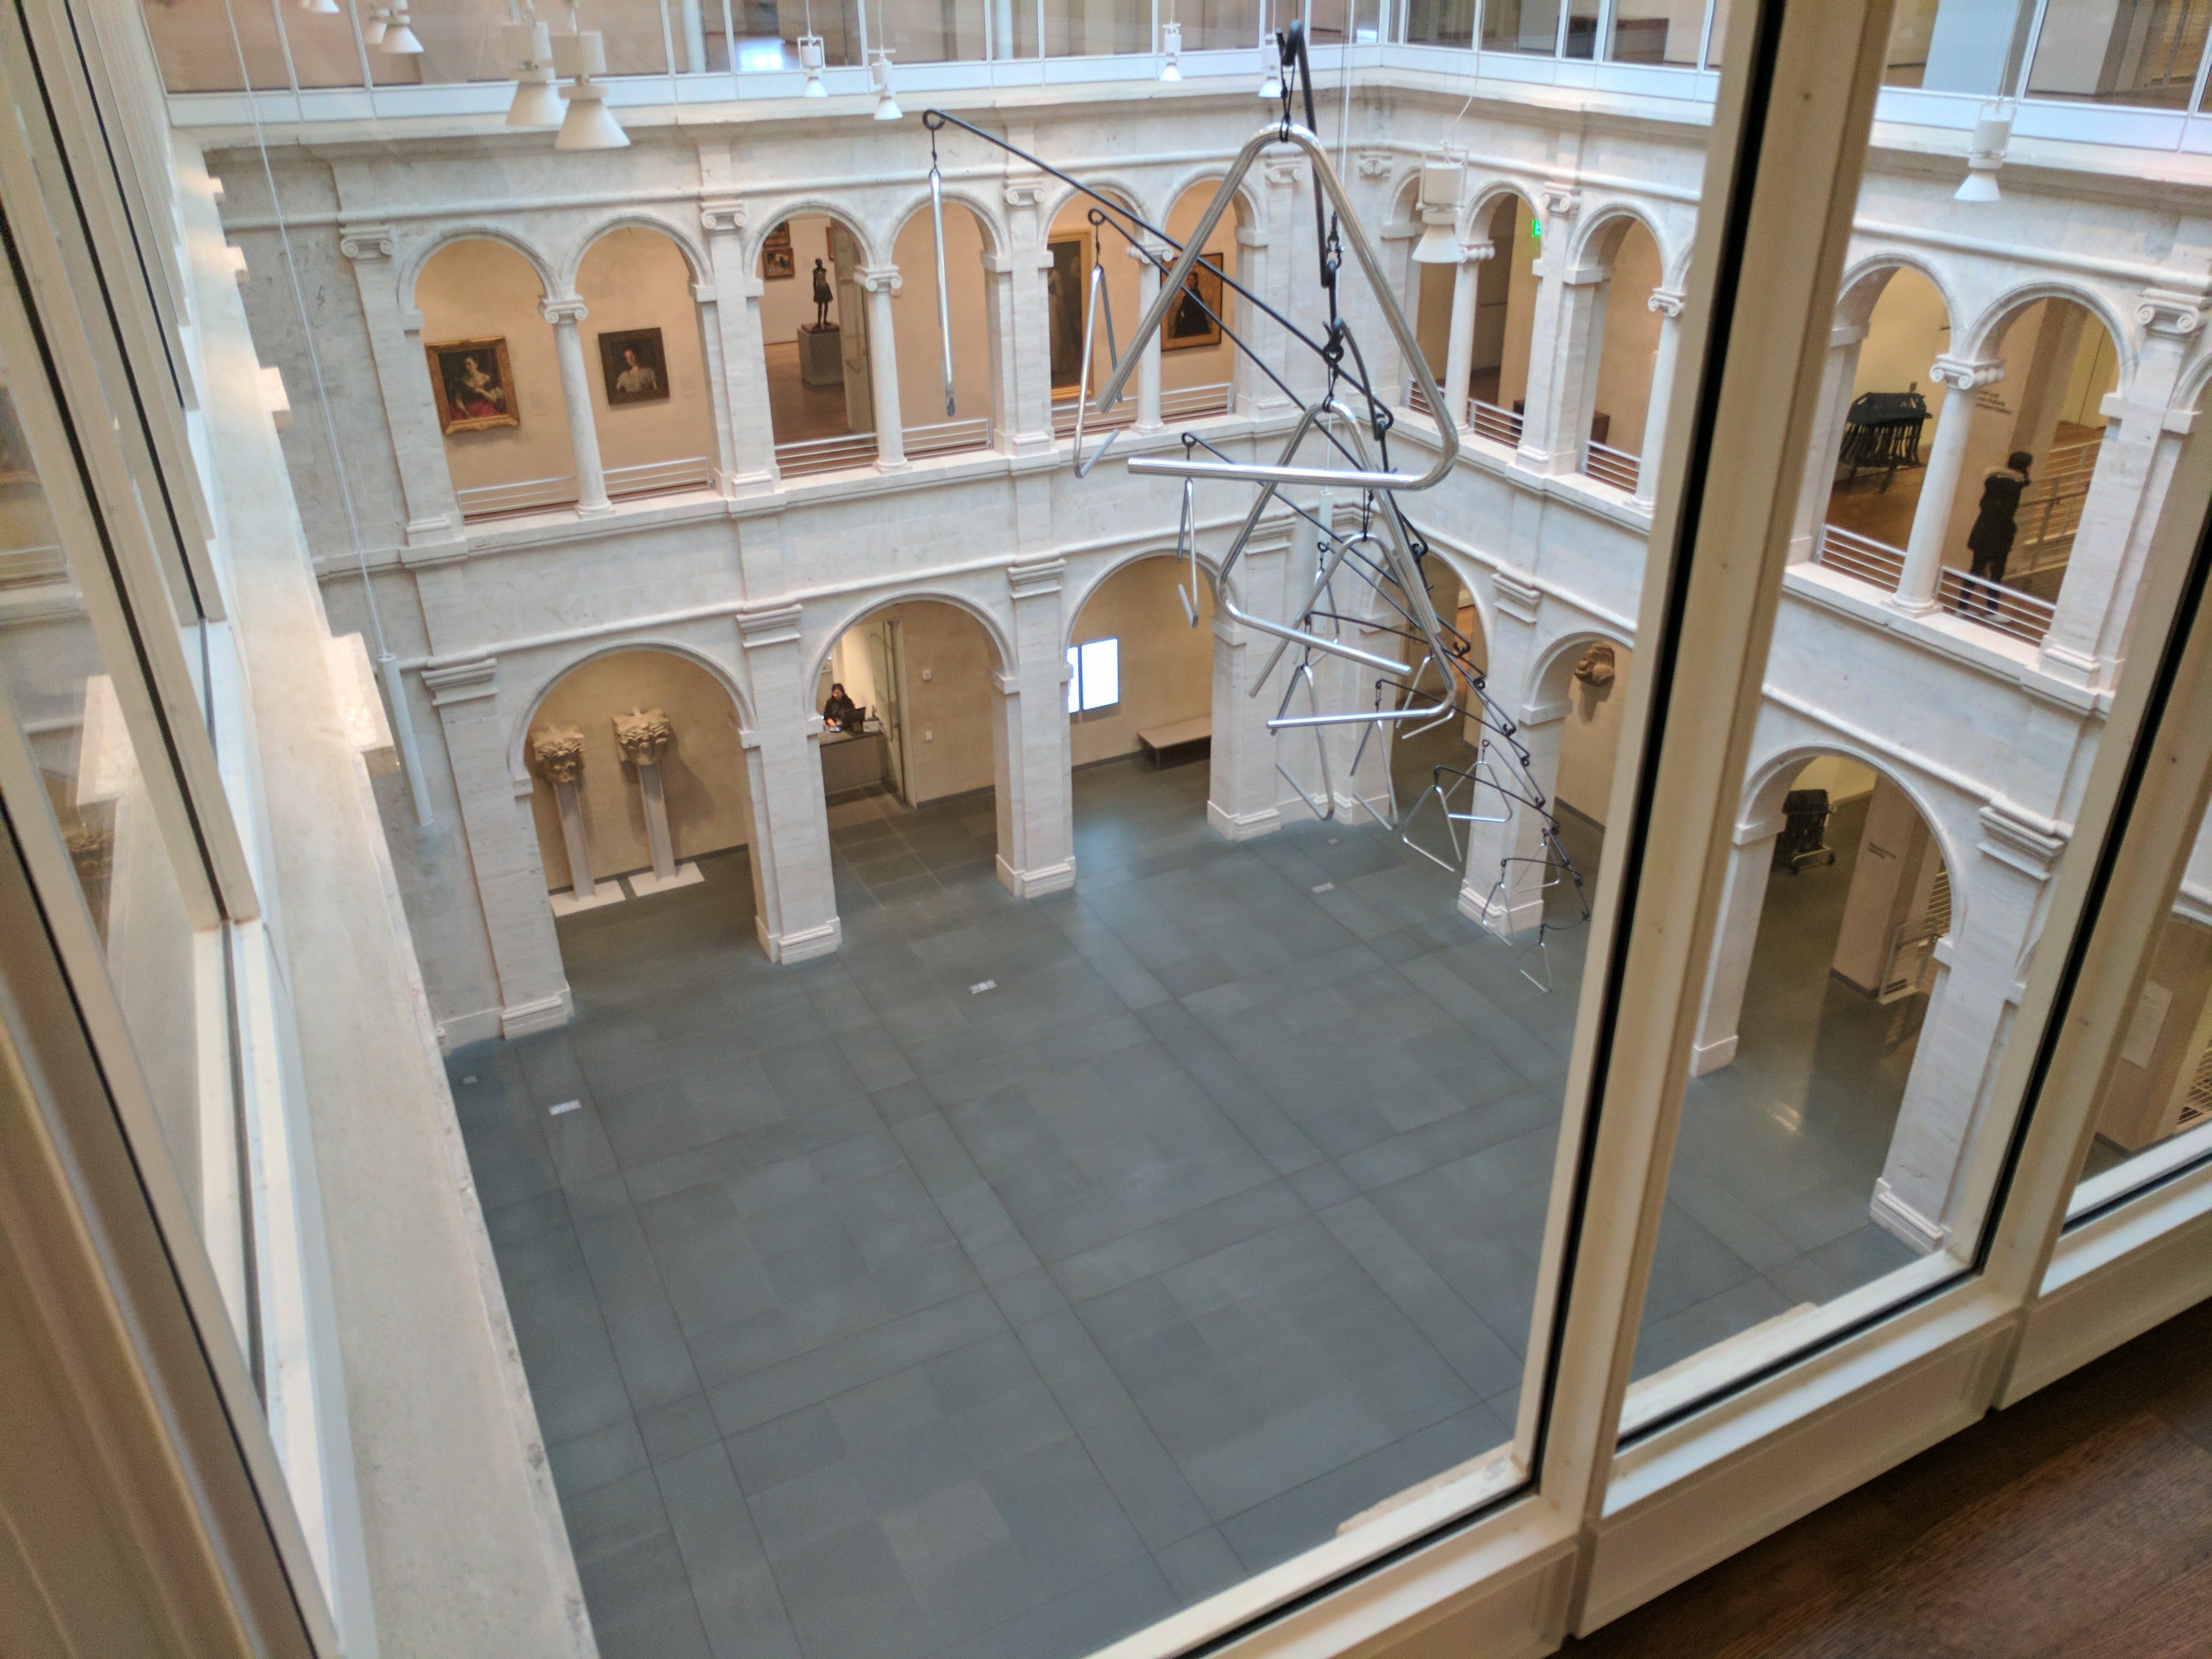 A dizzying view of the entire third floor surrounding the atrium at the HAM